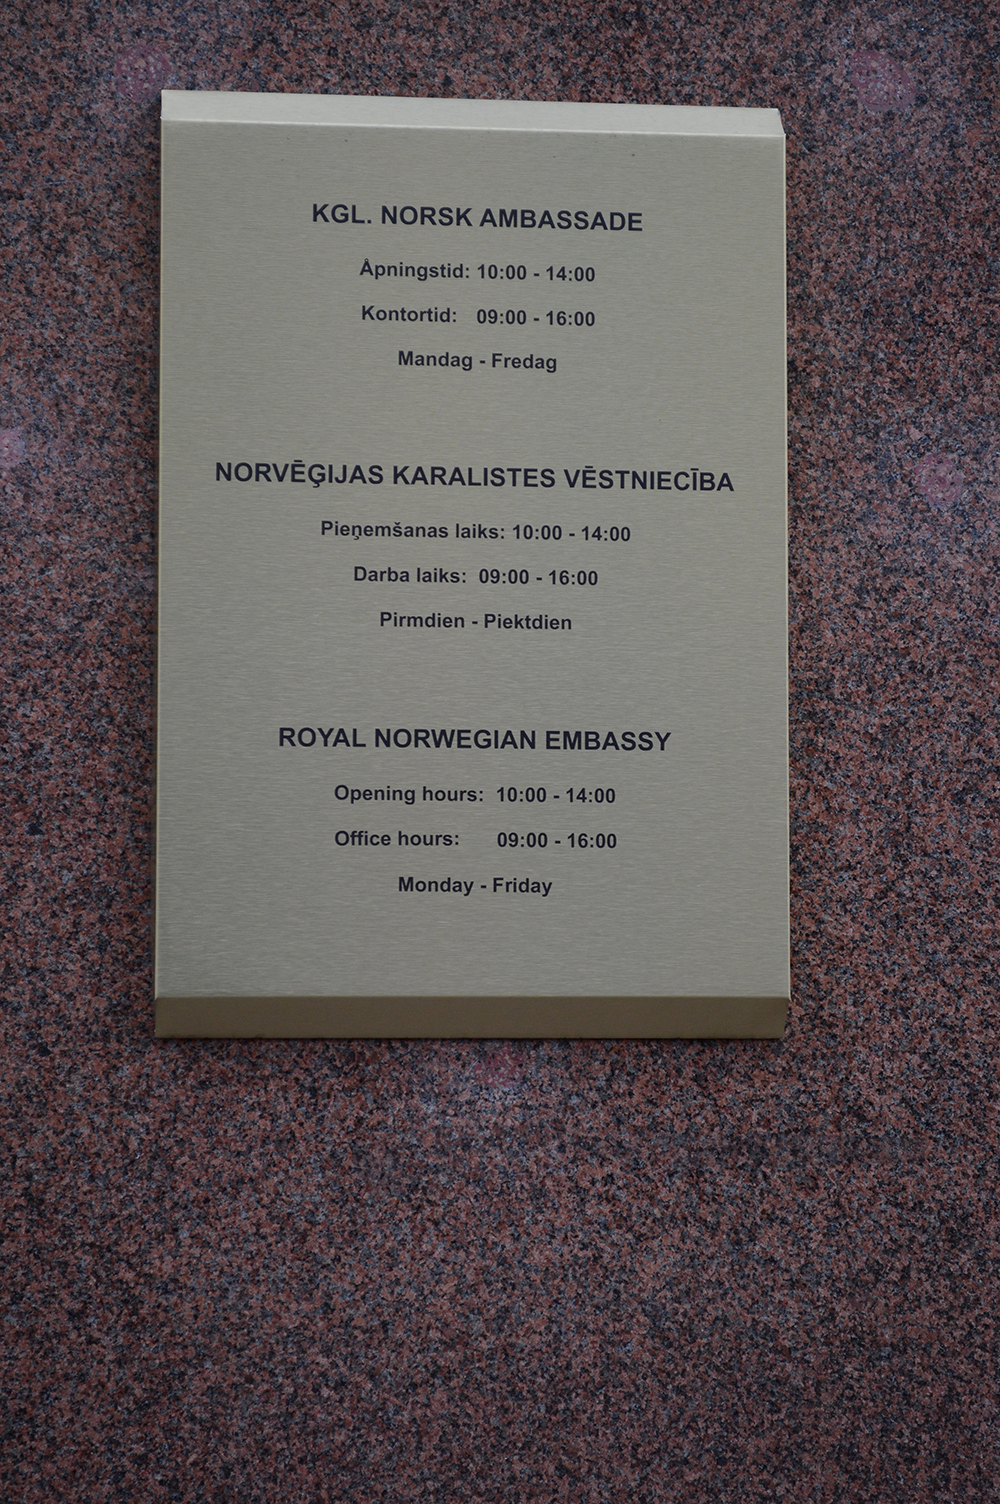 Norway embassy in Working hours